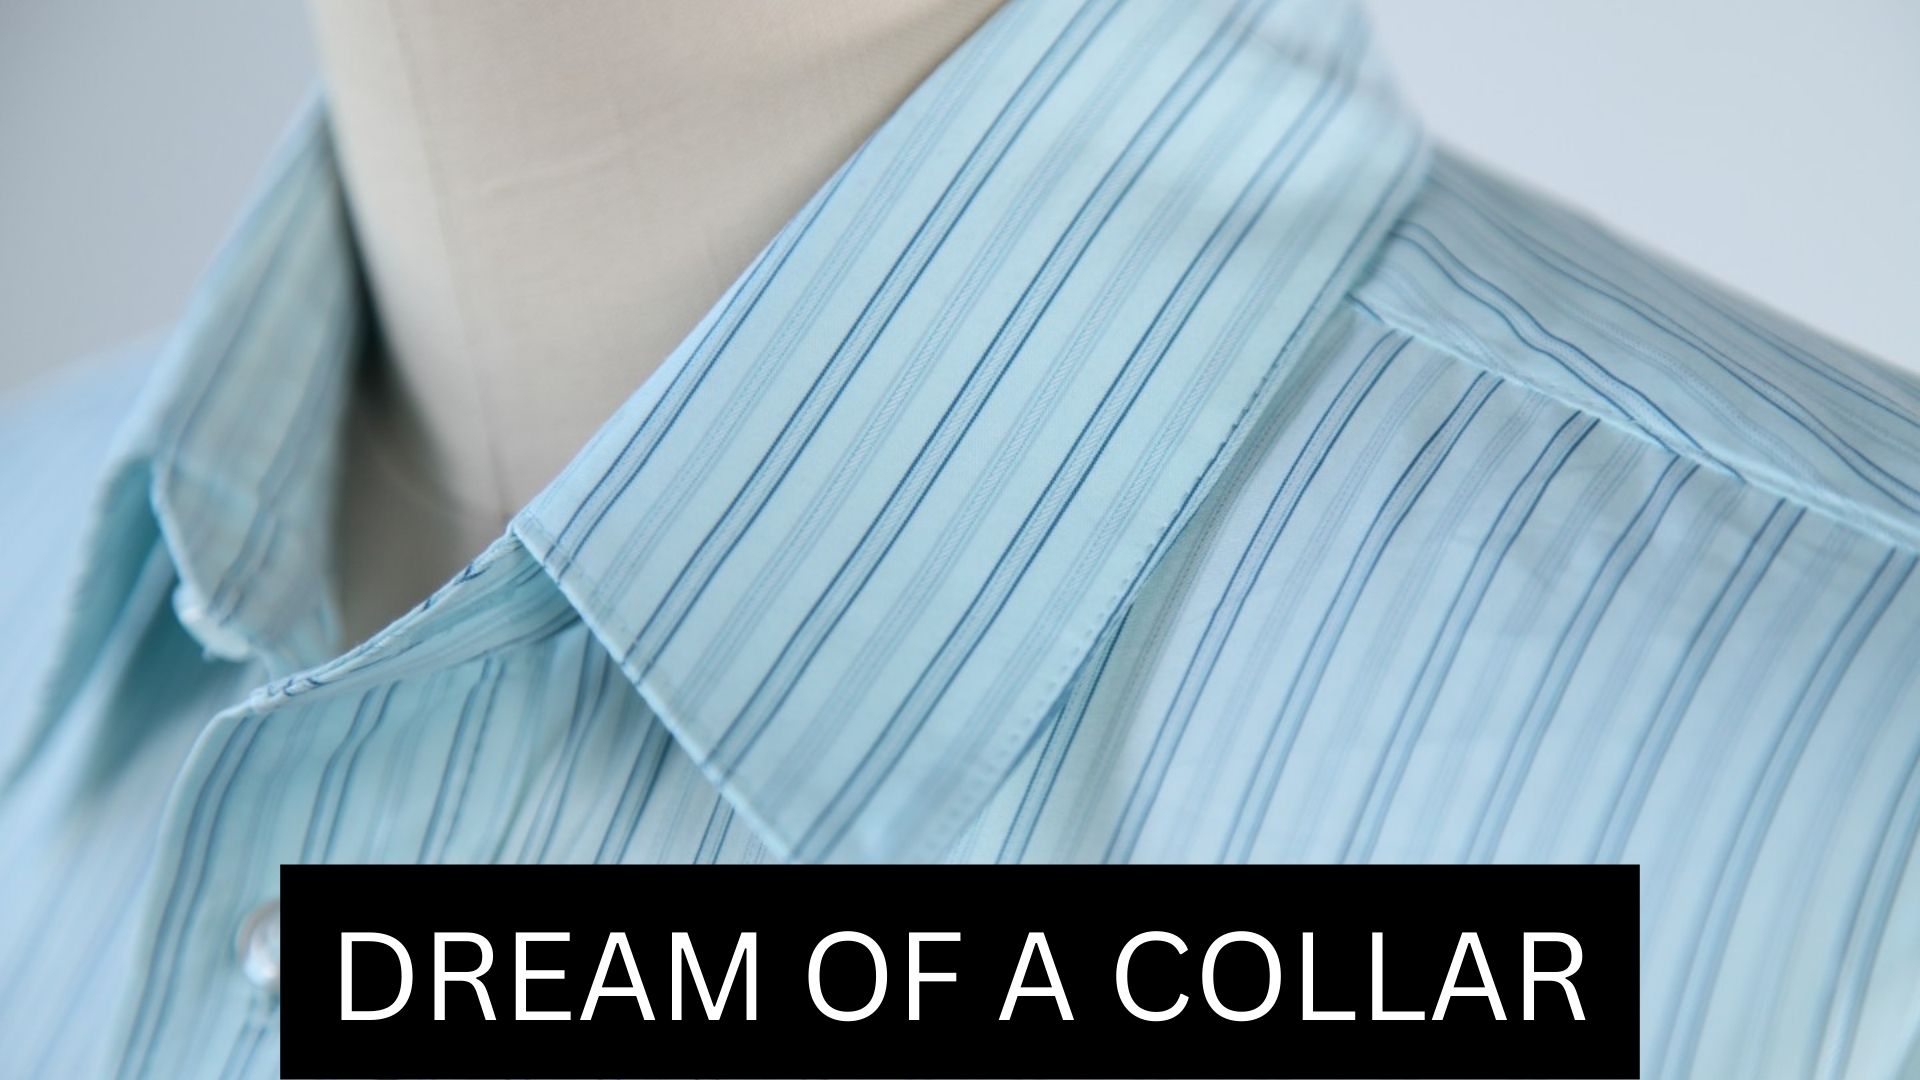 Dream Of A Collar - Symbolizes Confinement And Restraint